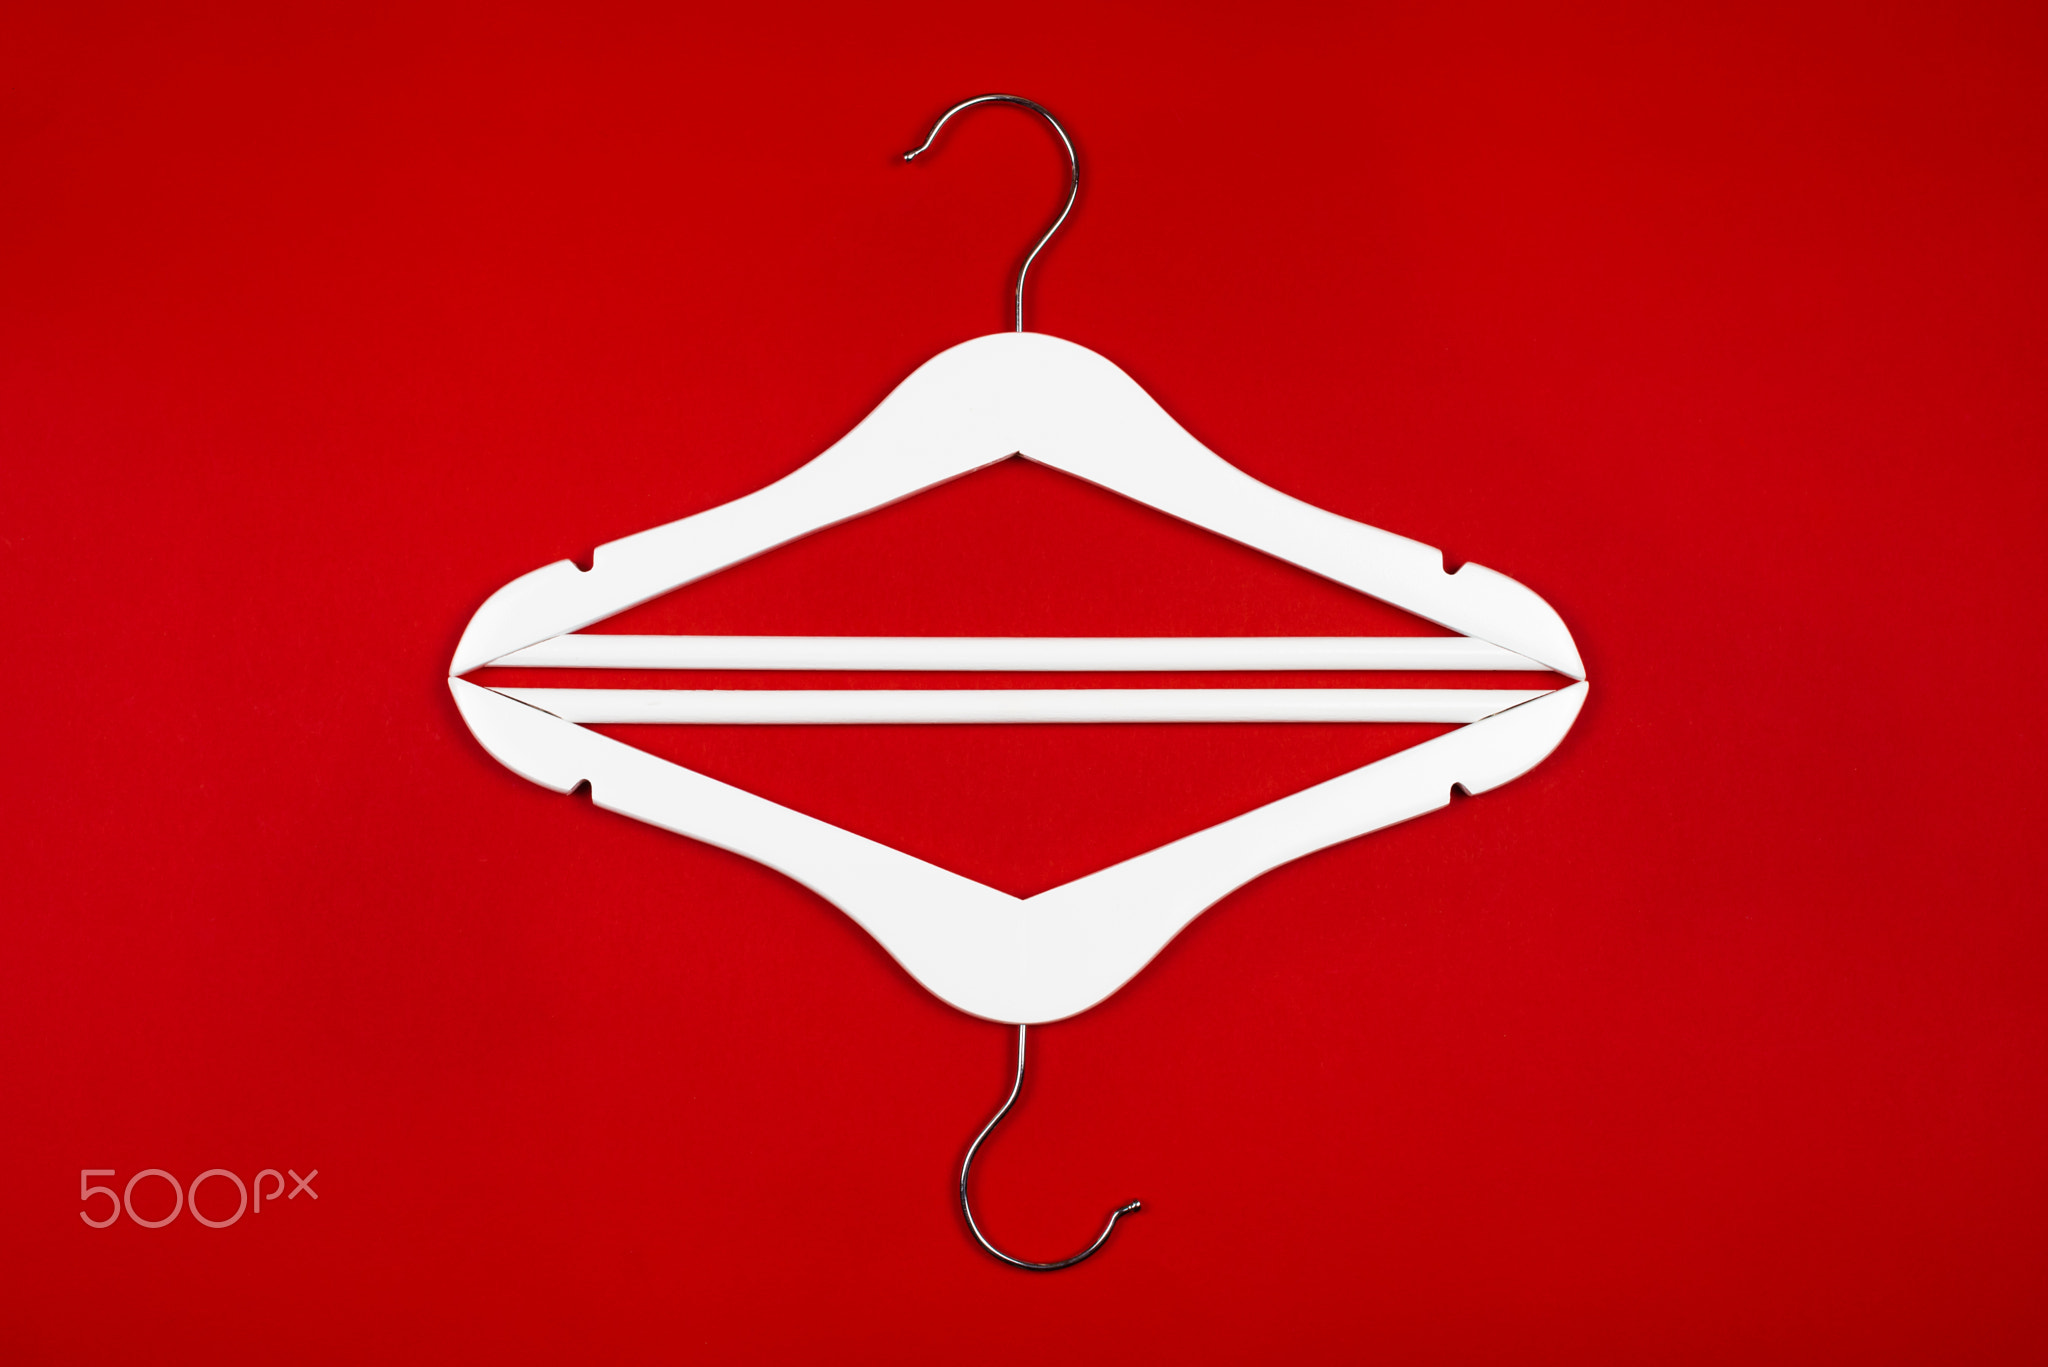 White hangers on a red background. Sales clothes concept.